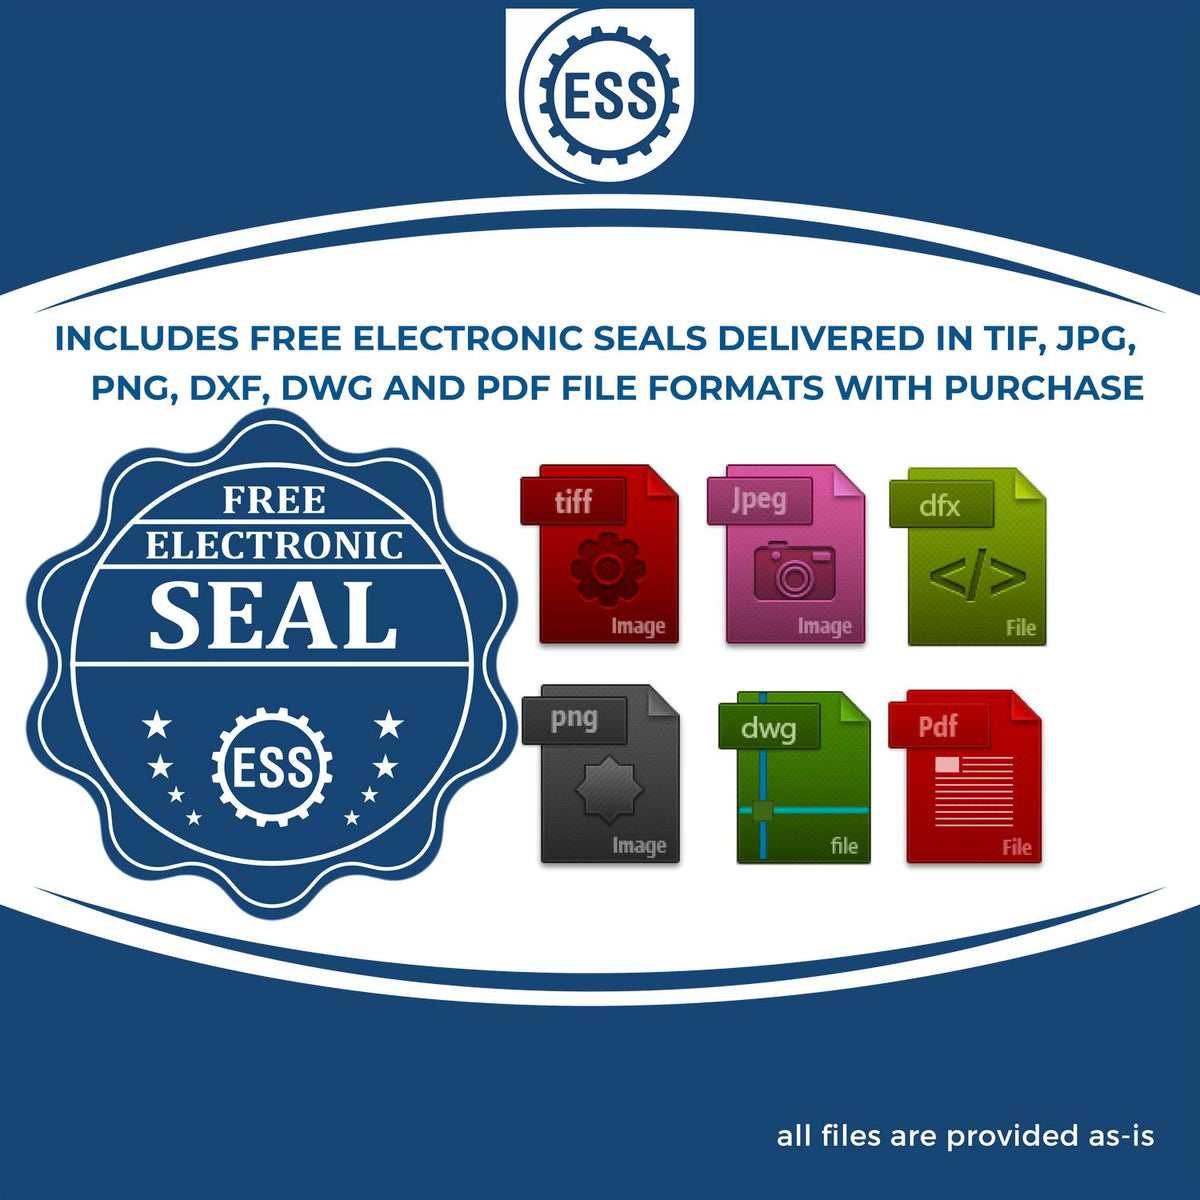 An infographic for the free electronic seal for the Gift Missouri Land Surveyor Seal illustrating the different file type icons such as DXF, DWG, TIF, JPG and PNG.